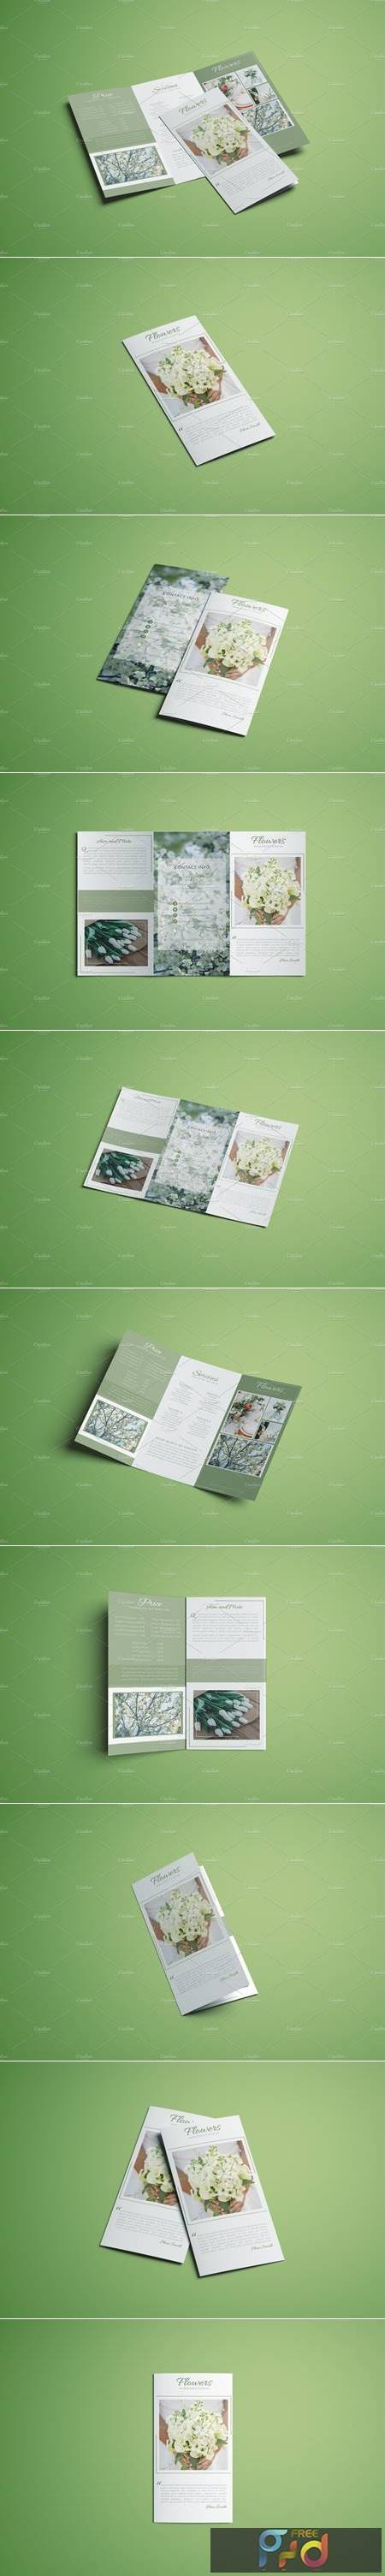 Trifold Business Brochure 4666609 1